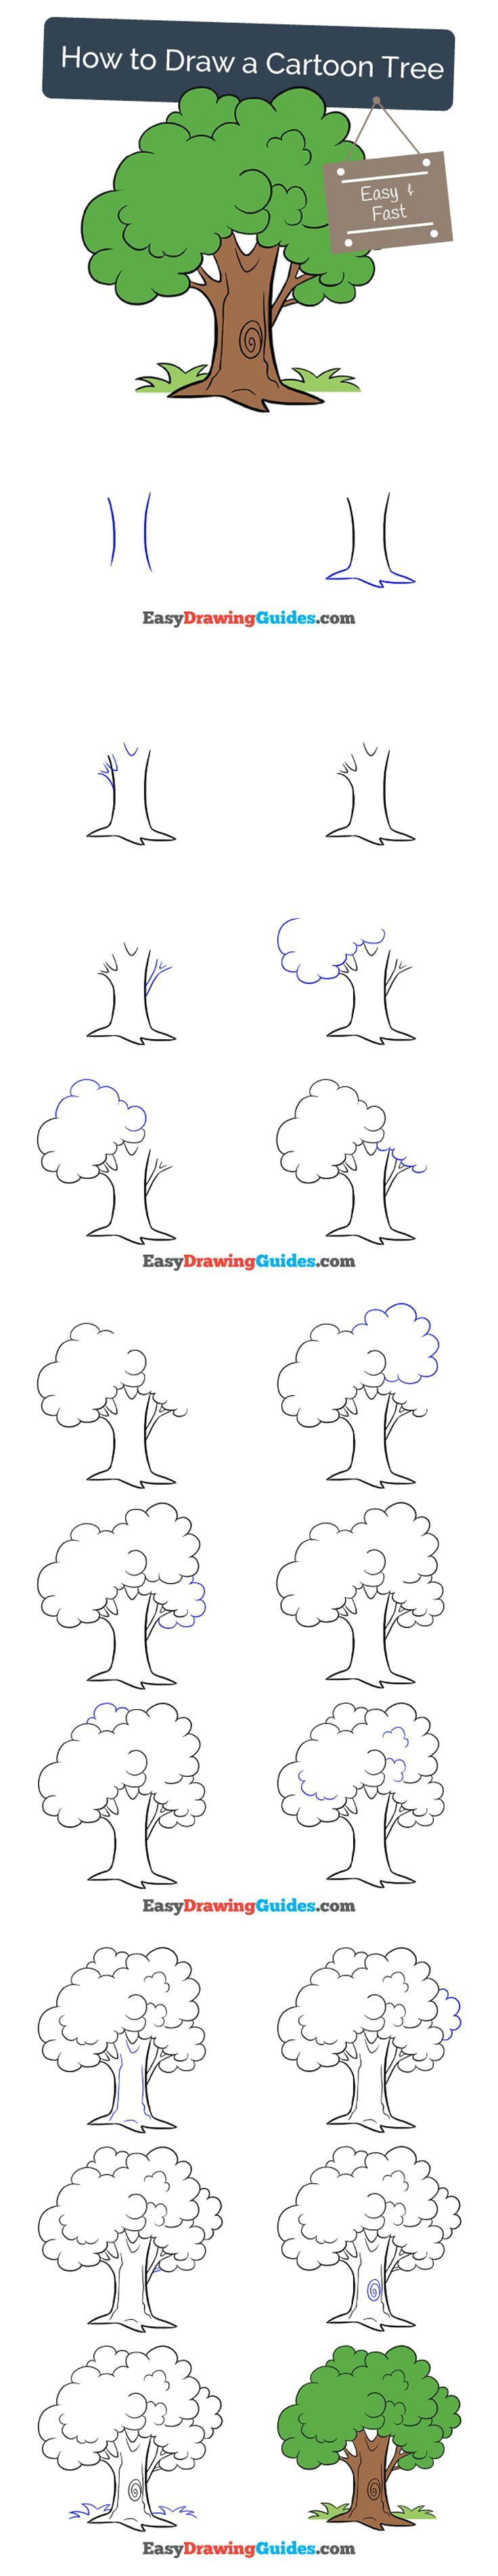 how to draw a cartoon tree drawings drawings drawing tutorials for kids easy drawings